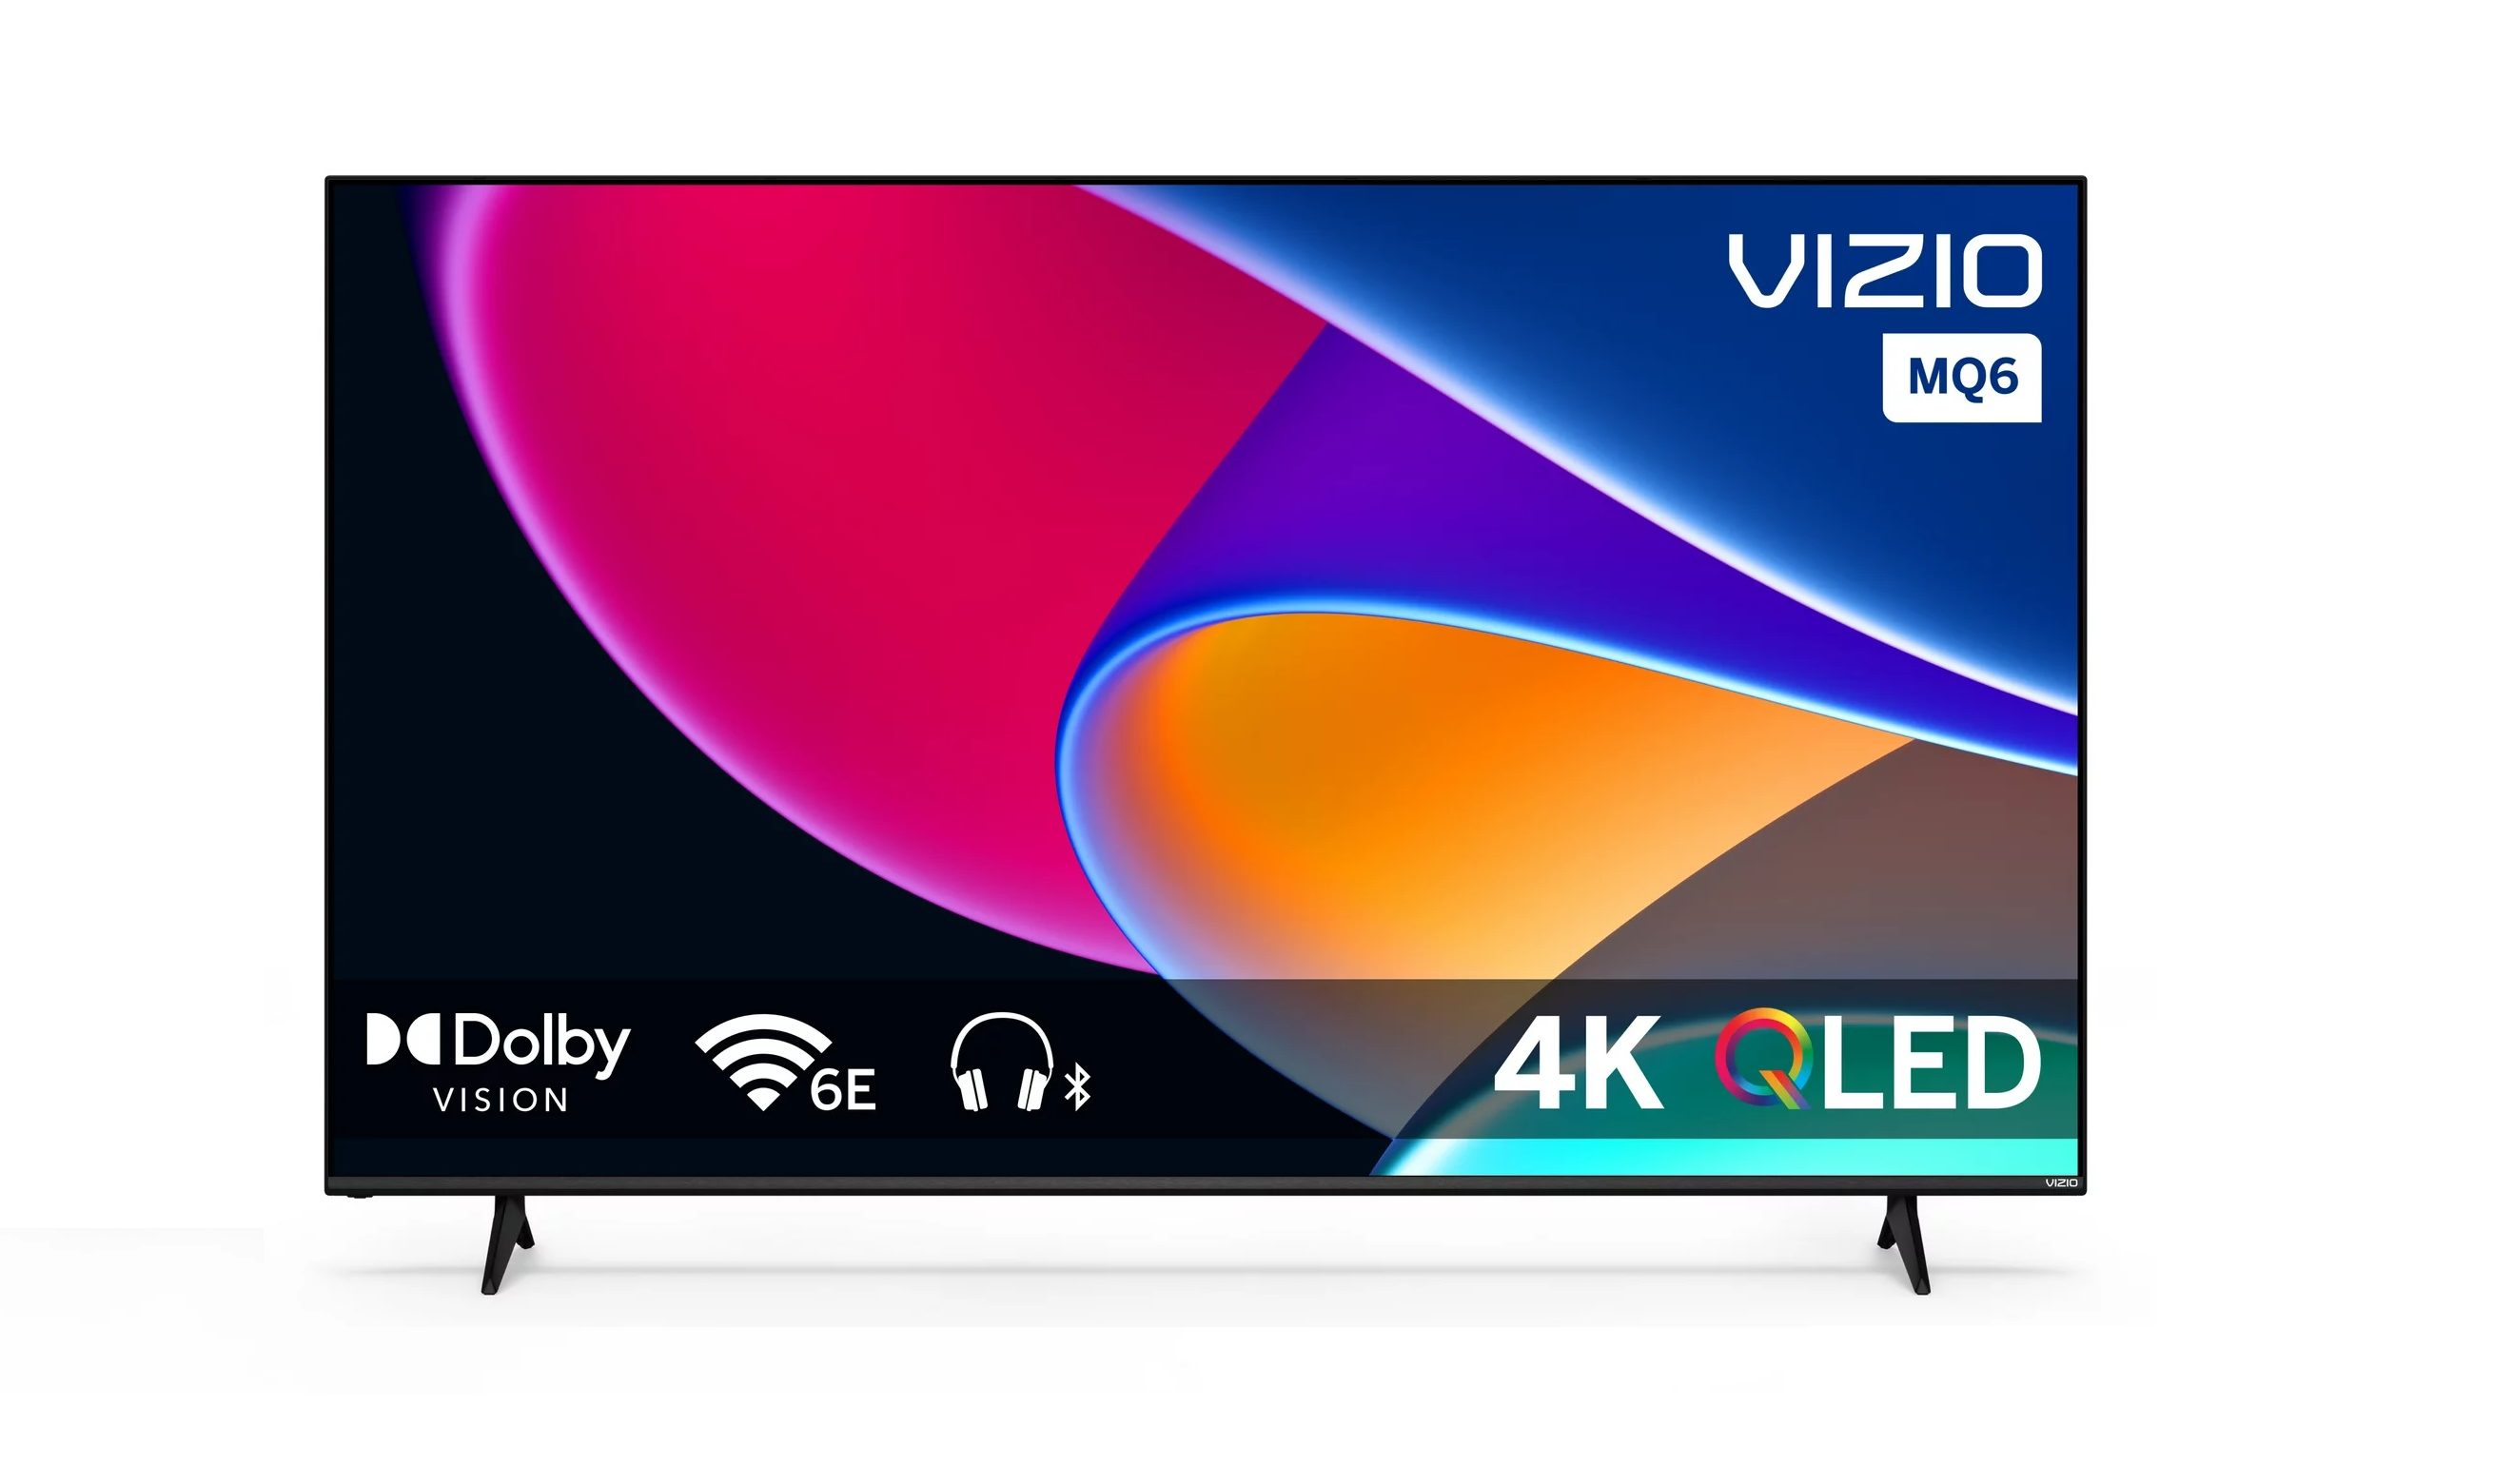 Best 70-inch TV deals: Get a big screen for sports for $450